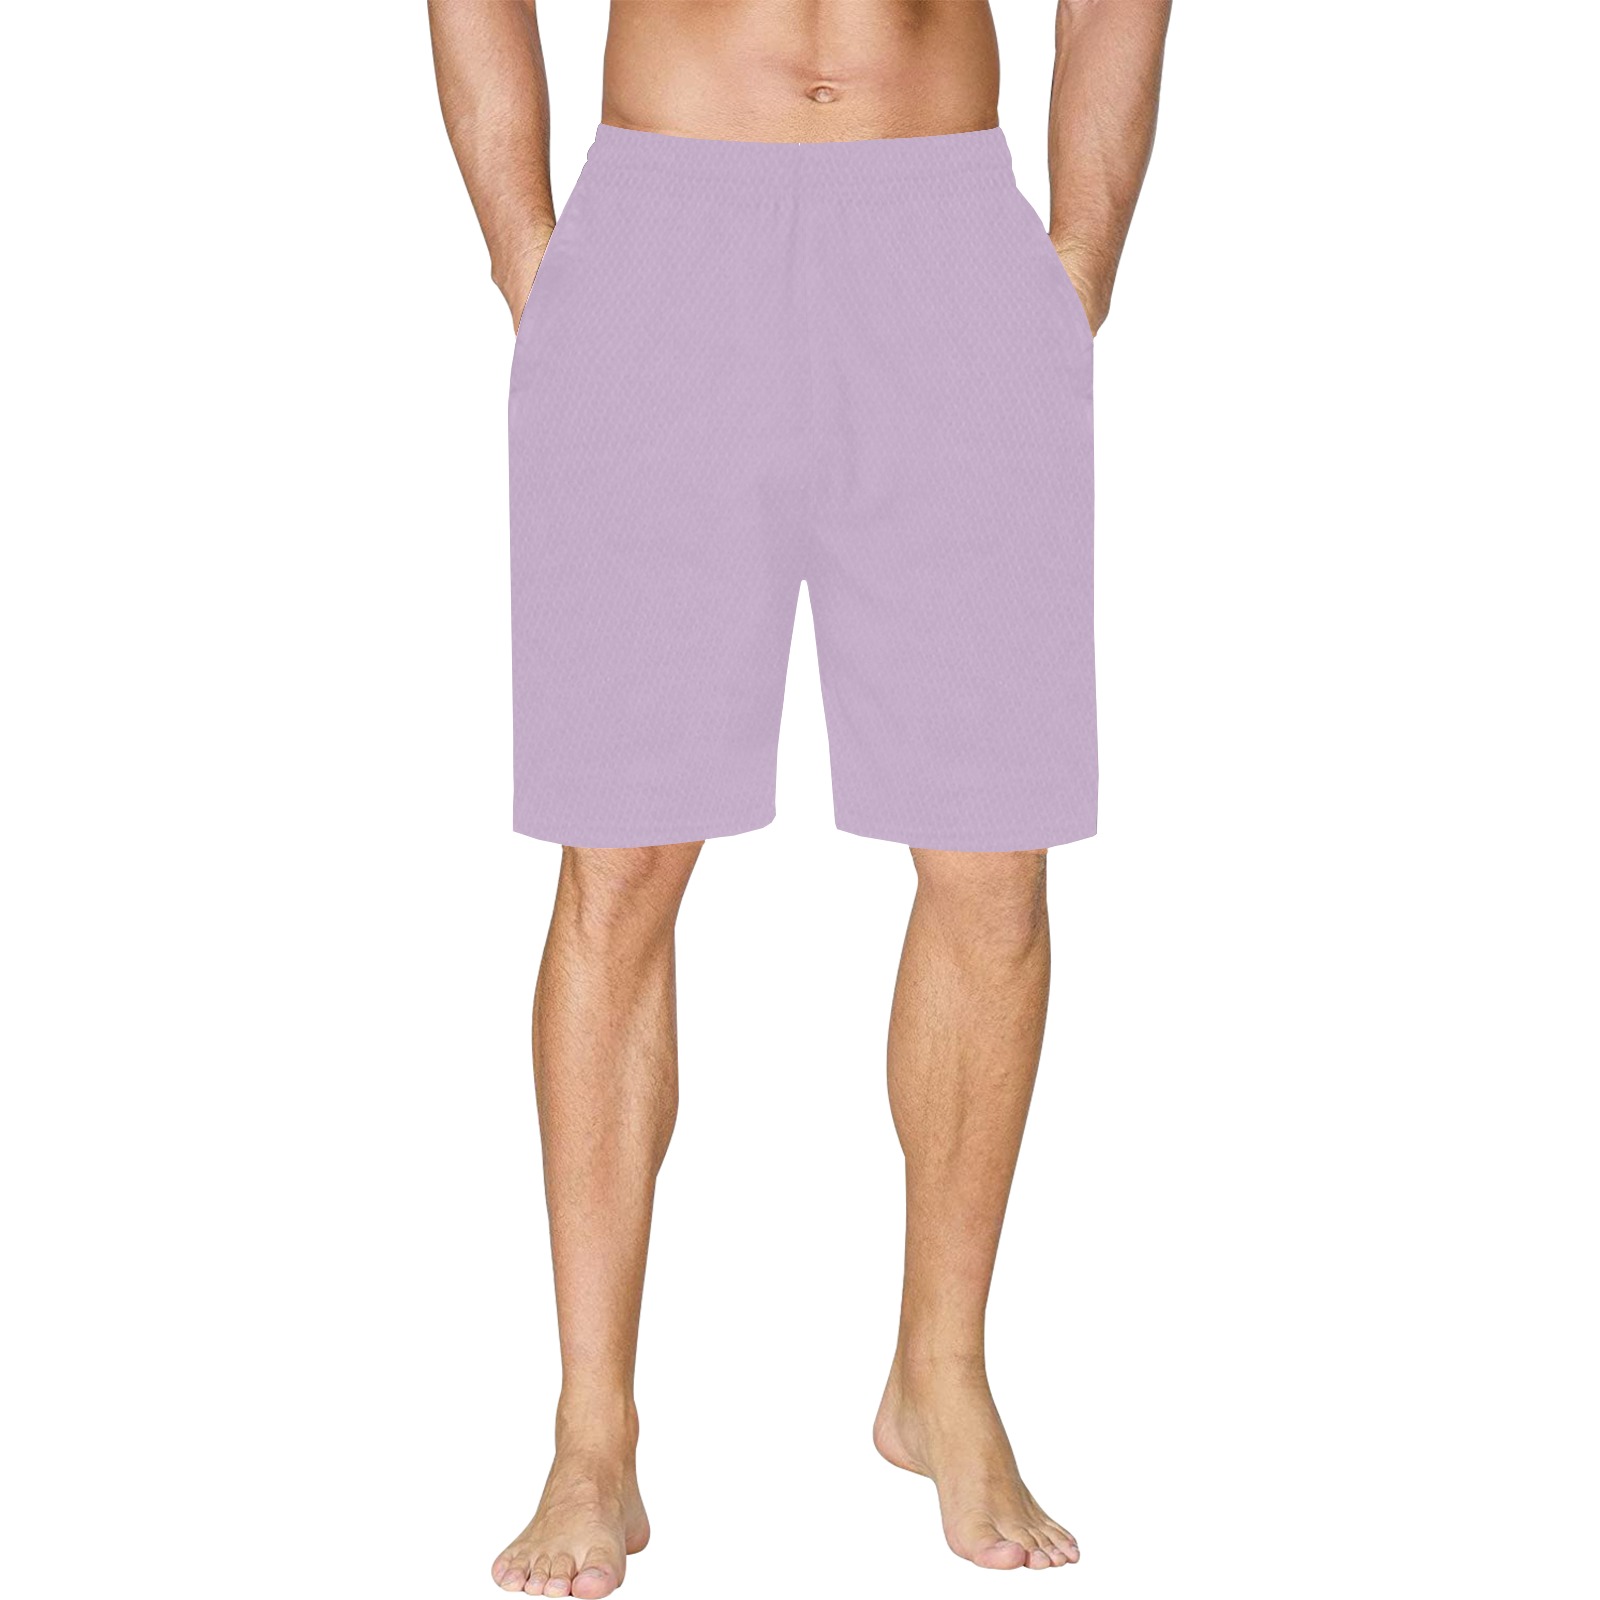 purple ice All Over Print Basketball Shorts with Pocket